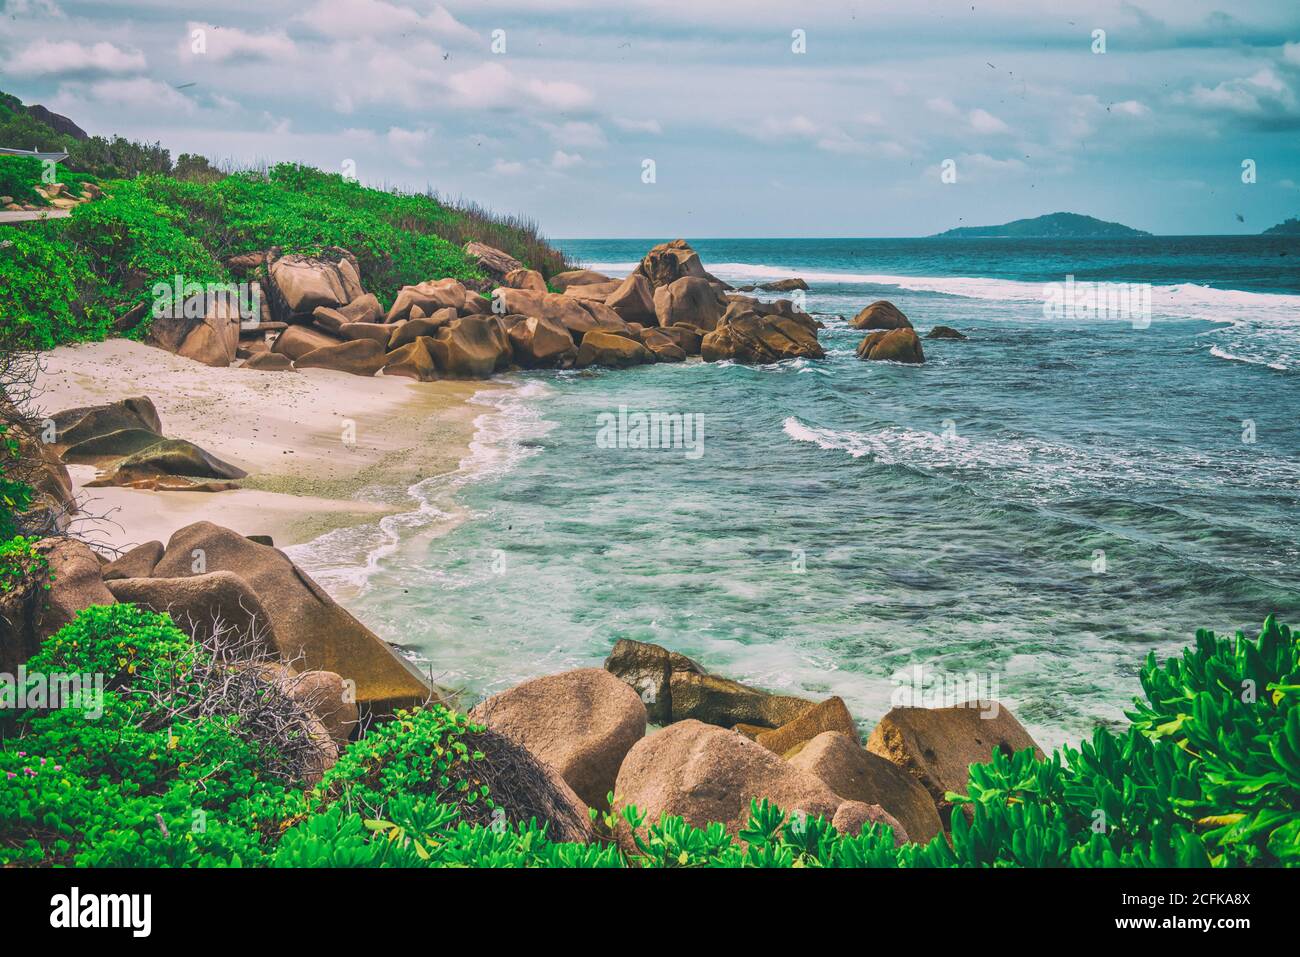 Amazing picturesque paradise beach with granite rocks, white sand and palm trees on a tropical landscape, Seychelles. Stock Photo